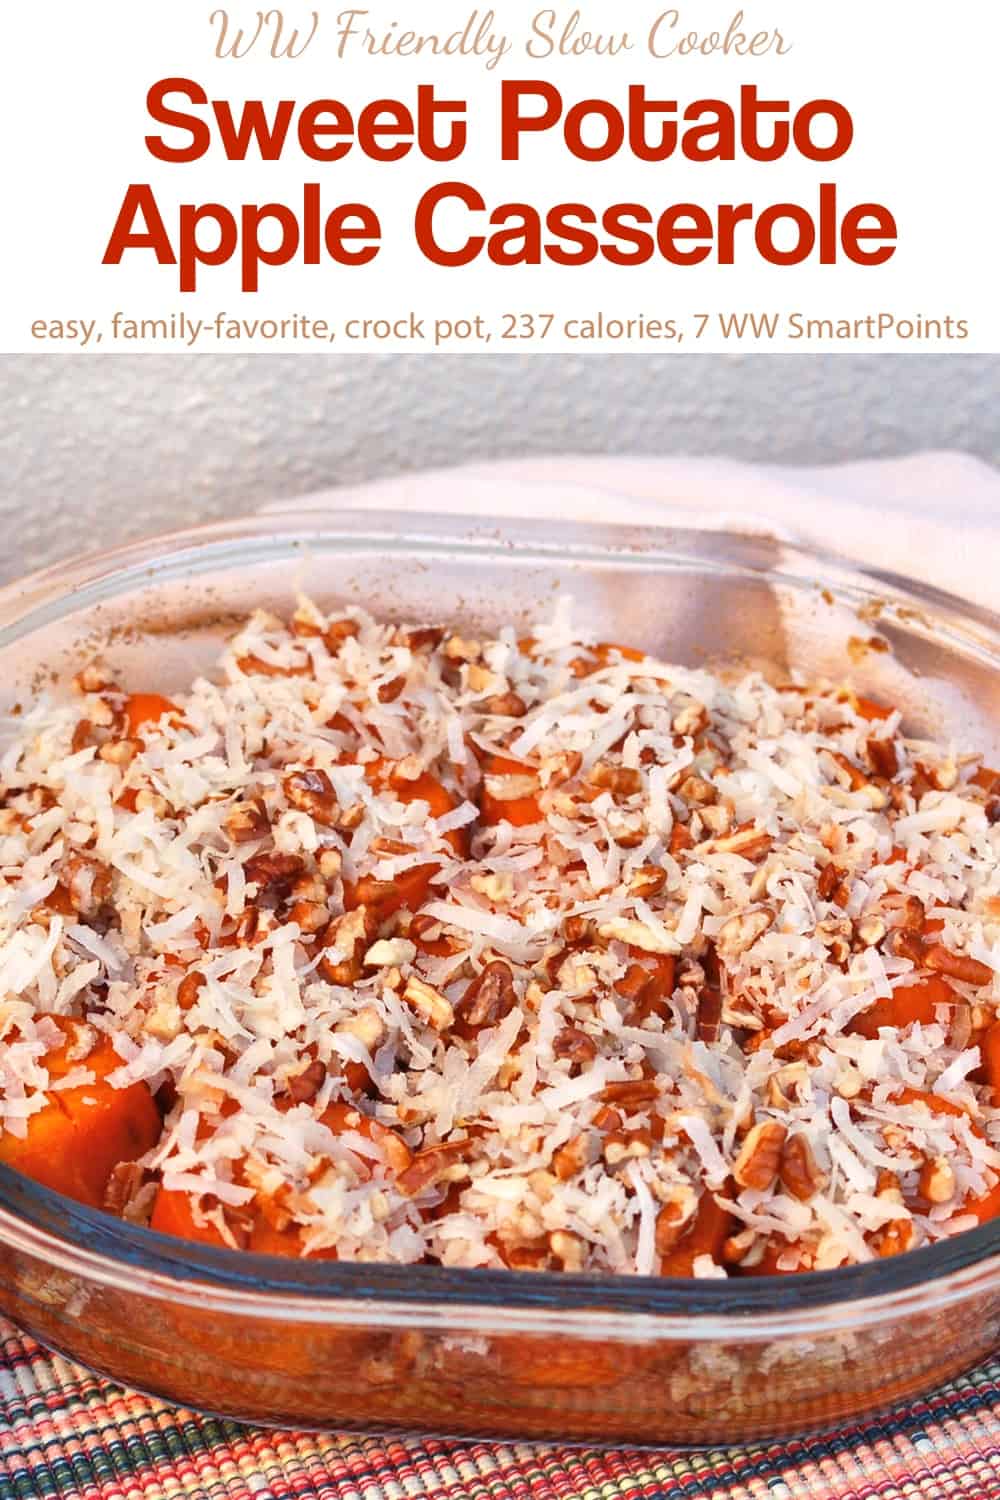 Slow cooker sweet potato apple casserole topped with chopped pecans and shredded coconut in glass serving dish.